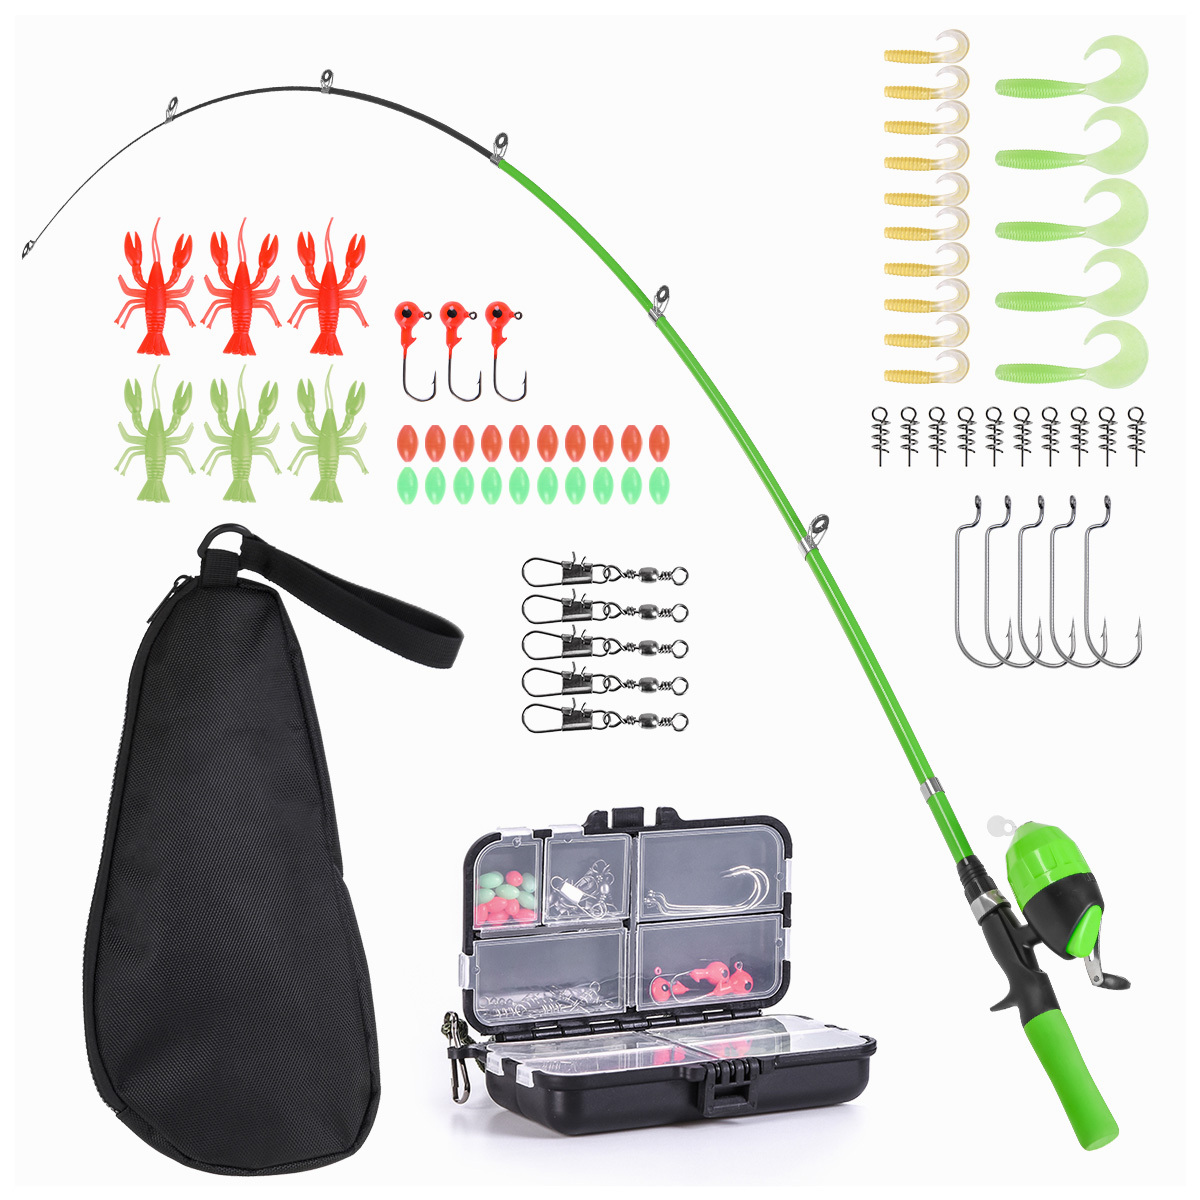 Explore the Outdoors with this LEOFISHING Kids Fishing Pole Set